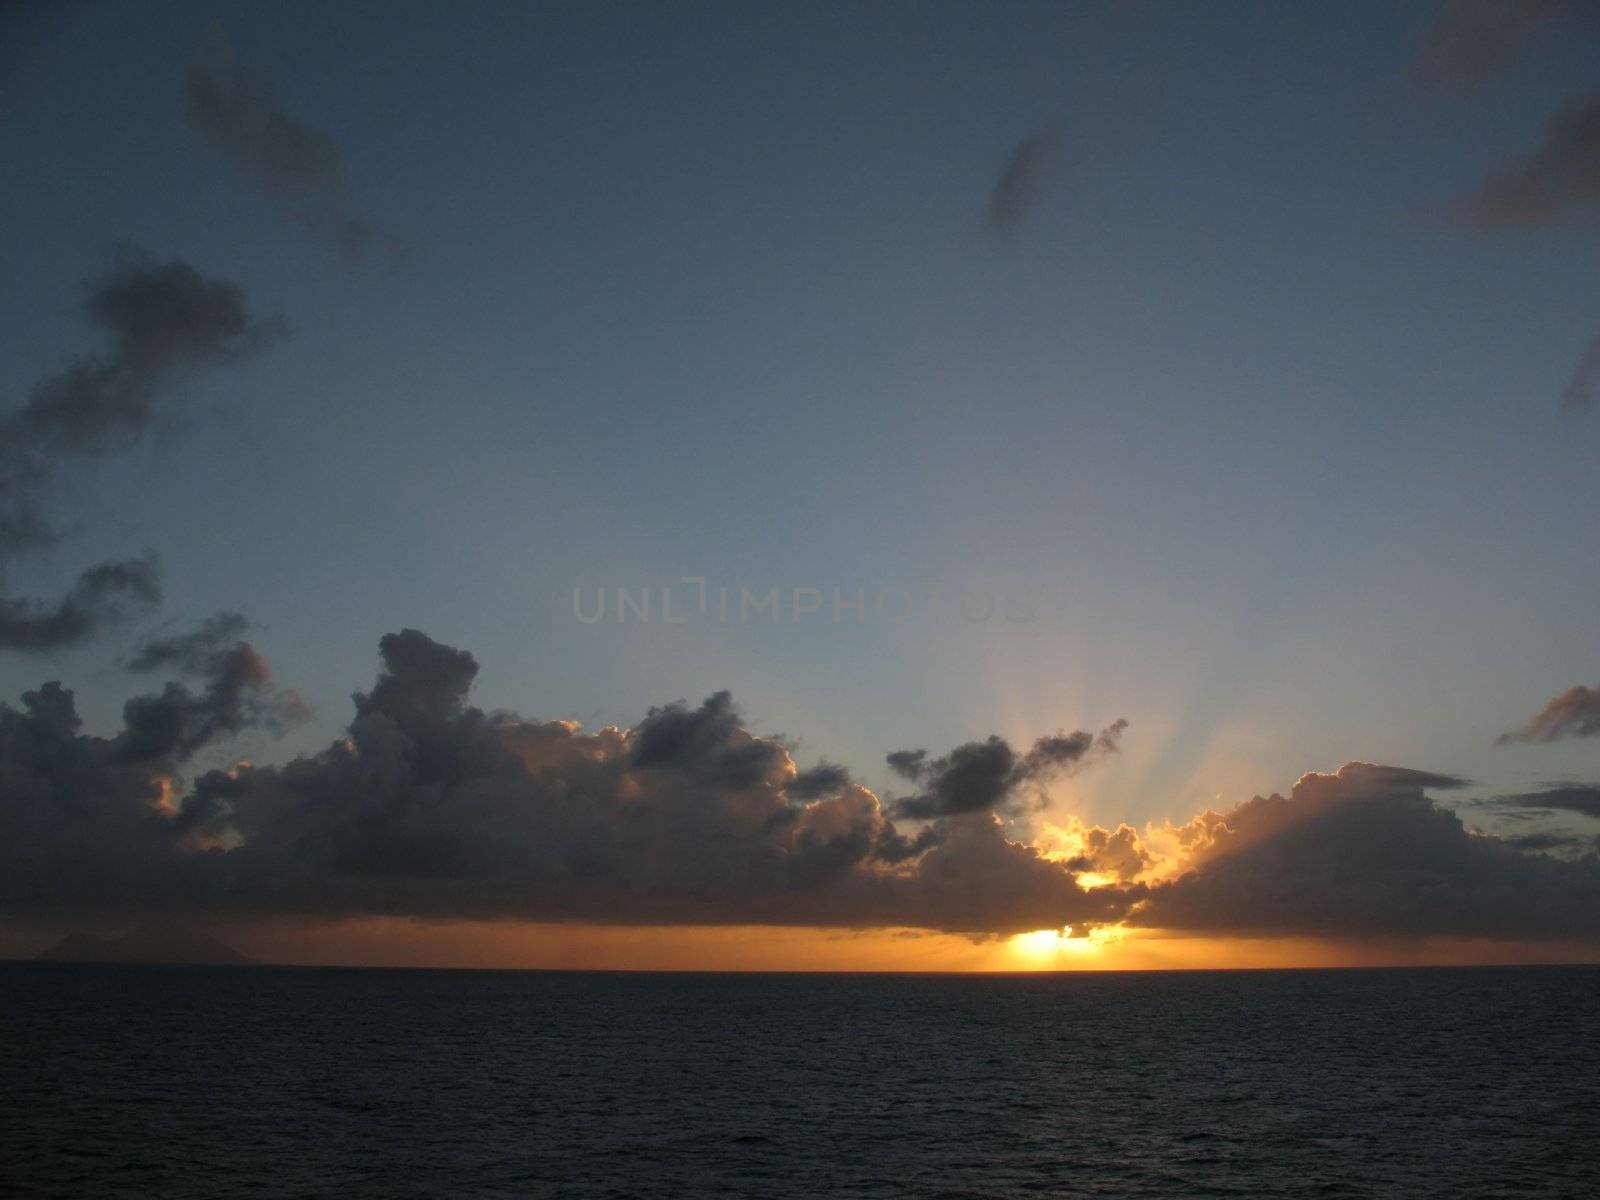 Sunset in the Caribbean by namdlo